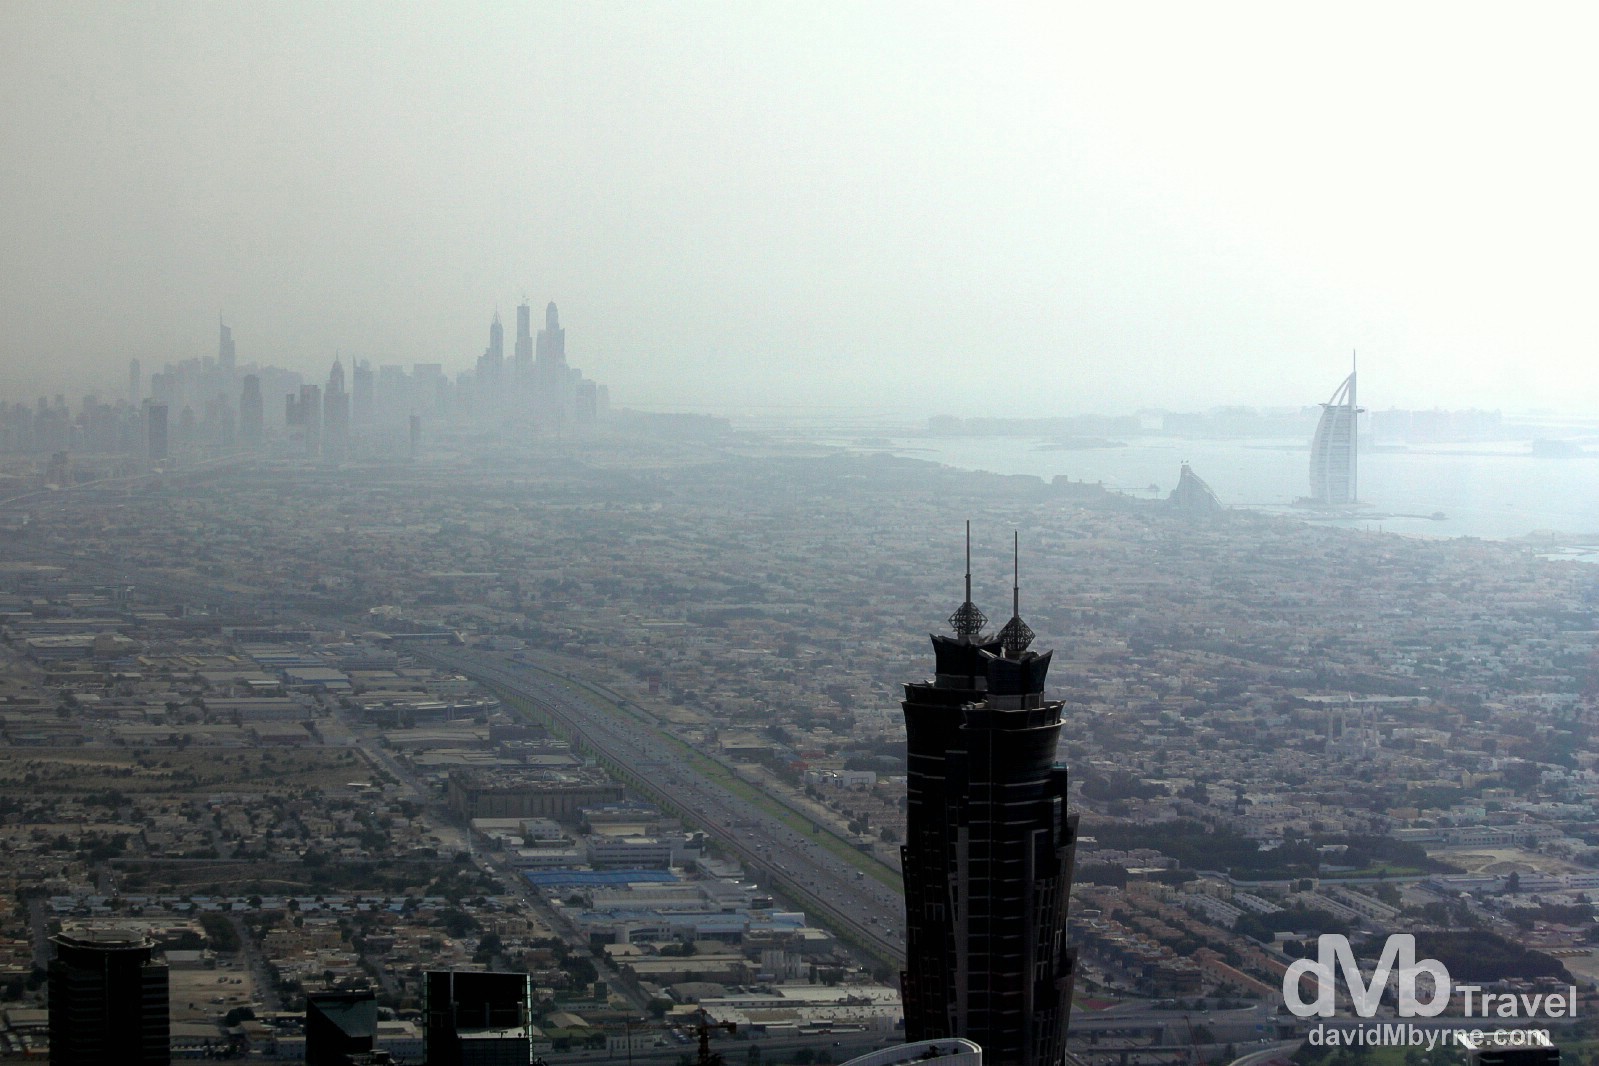 The distant towers of Dubai Marina, the man-made Palm Jumeirah island & the 7-star Burj Al Arab as seen from the At The Top, the 124th floor viewing deck of the Burj Khalifa, the world's tallest building. Dubai, UAE. April 18th, 2014.